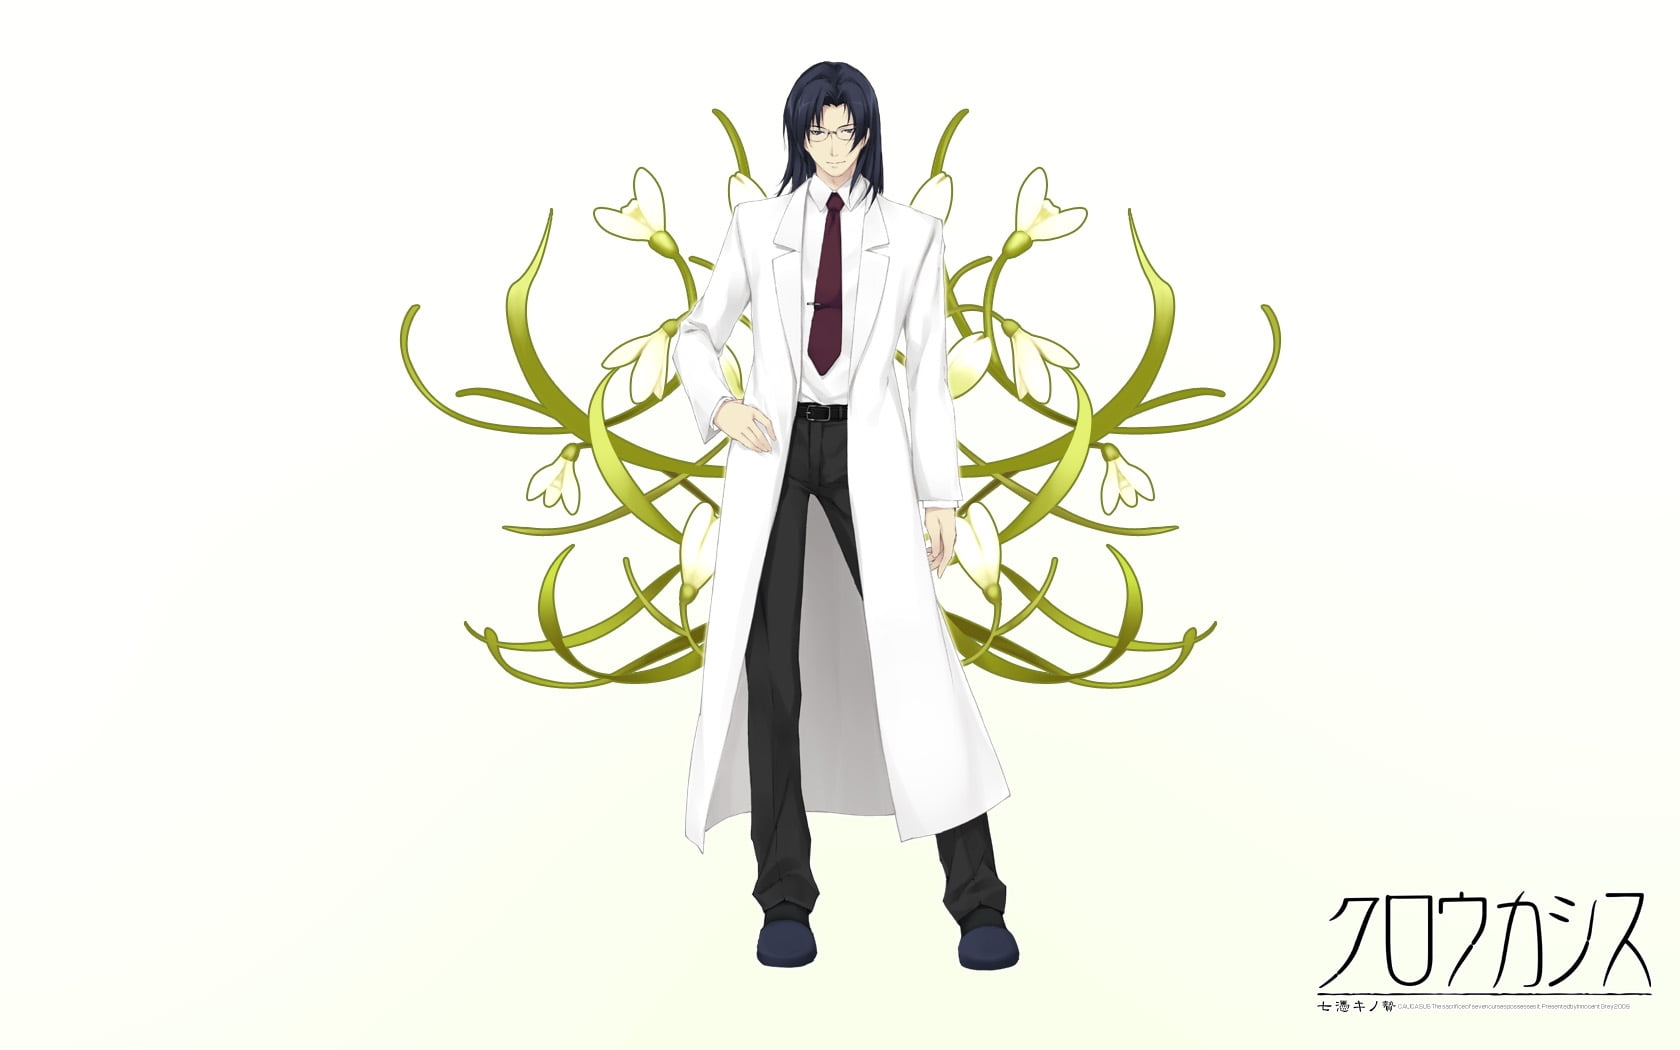 1280x768 resolution | male anime character in white lab gown and black ...